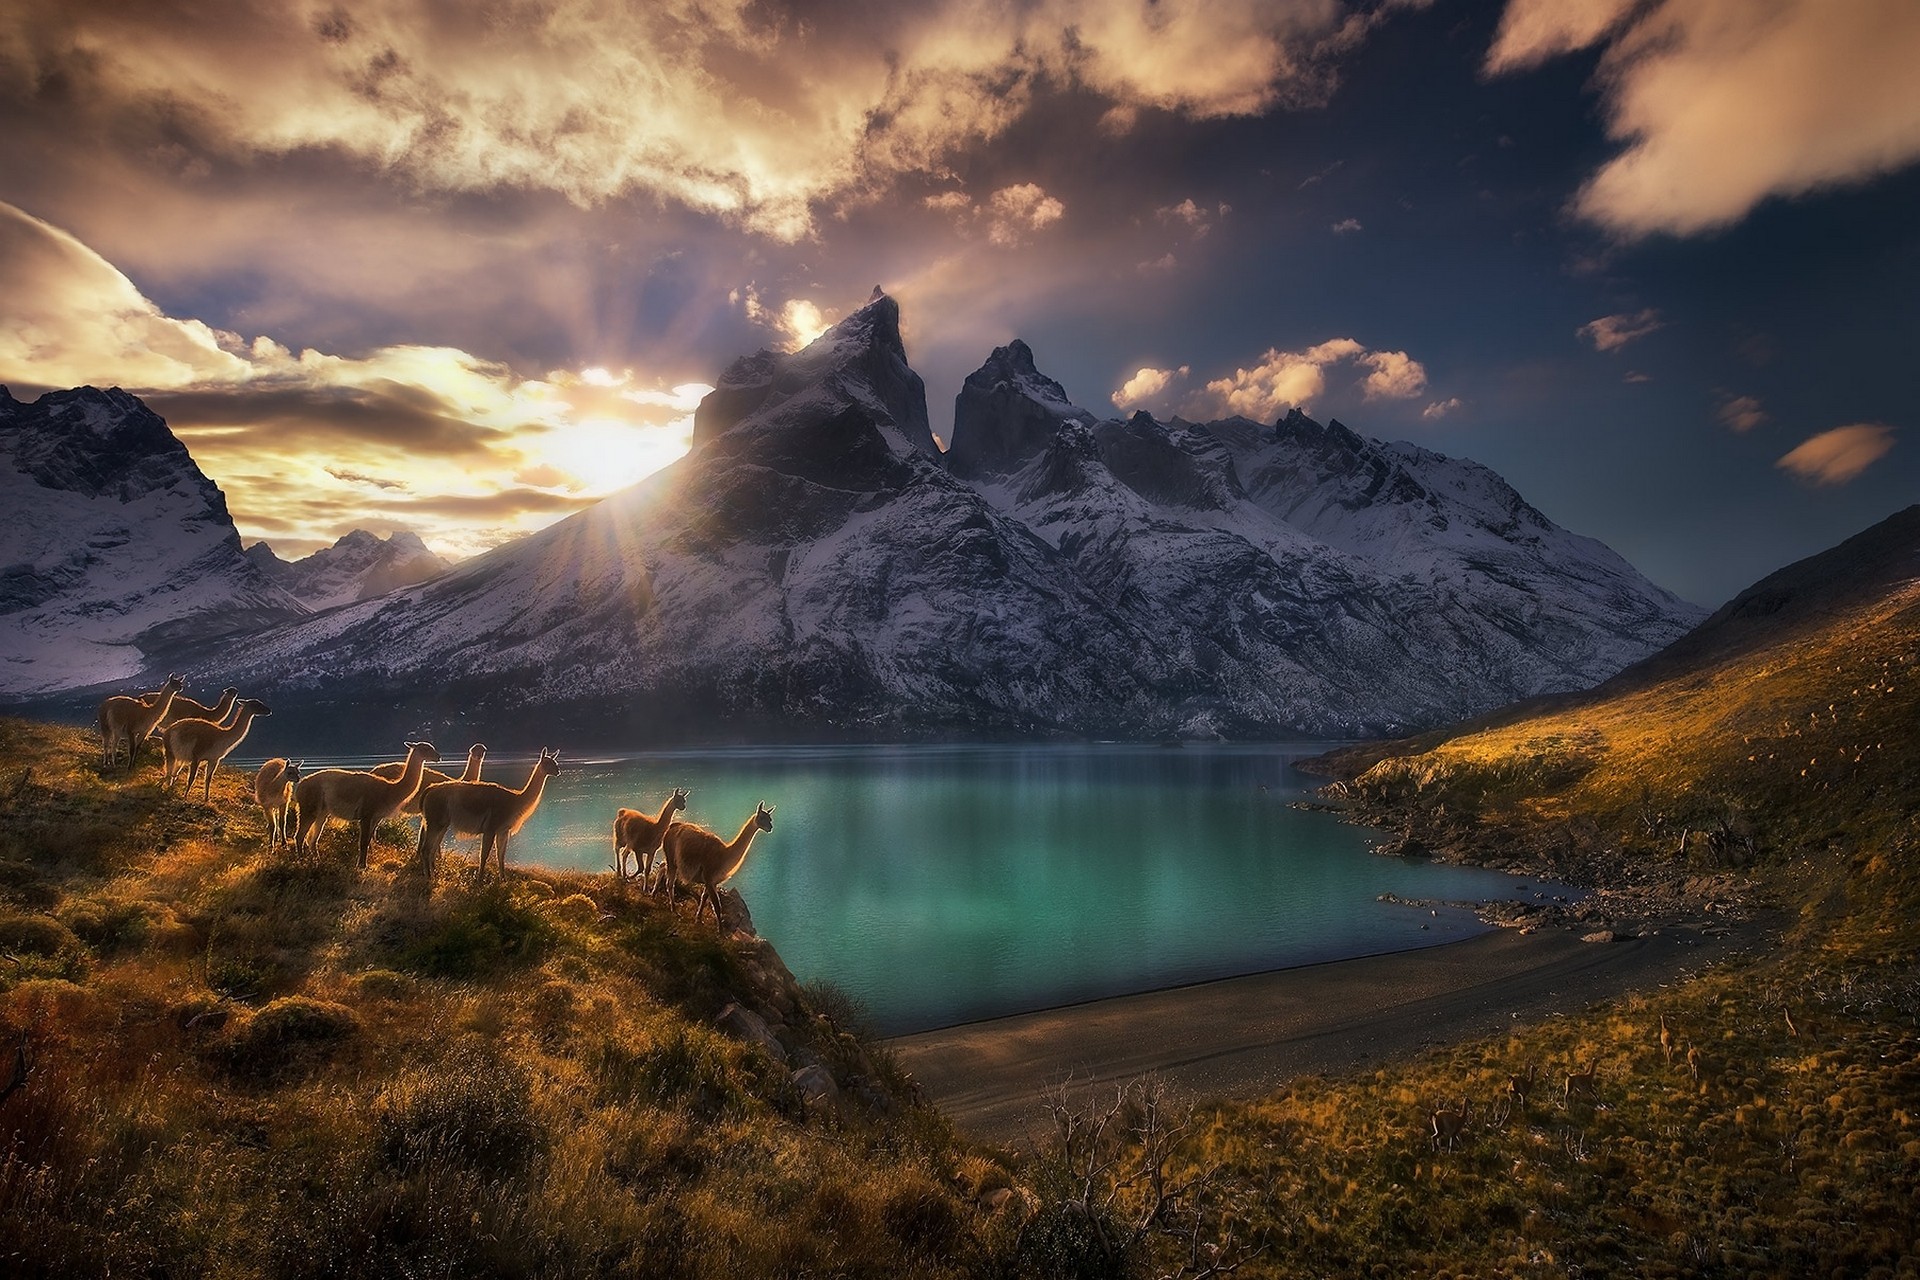 General 1920x1280 nature landscape photography lake mountains sunset dry grass sky clouds sunlight Torres del Paine Chile South America Patagonia